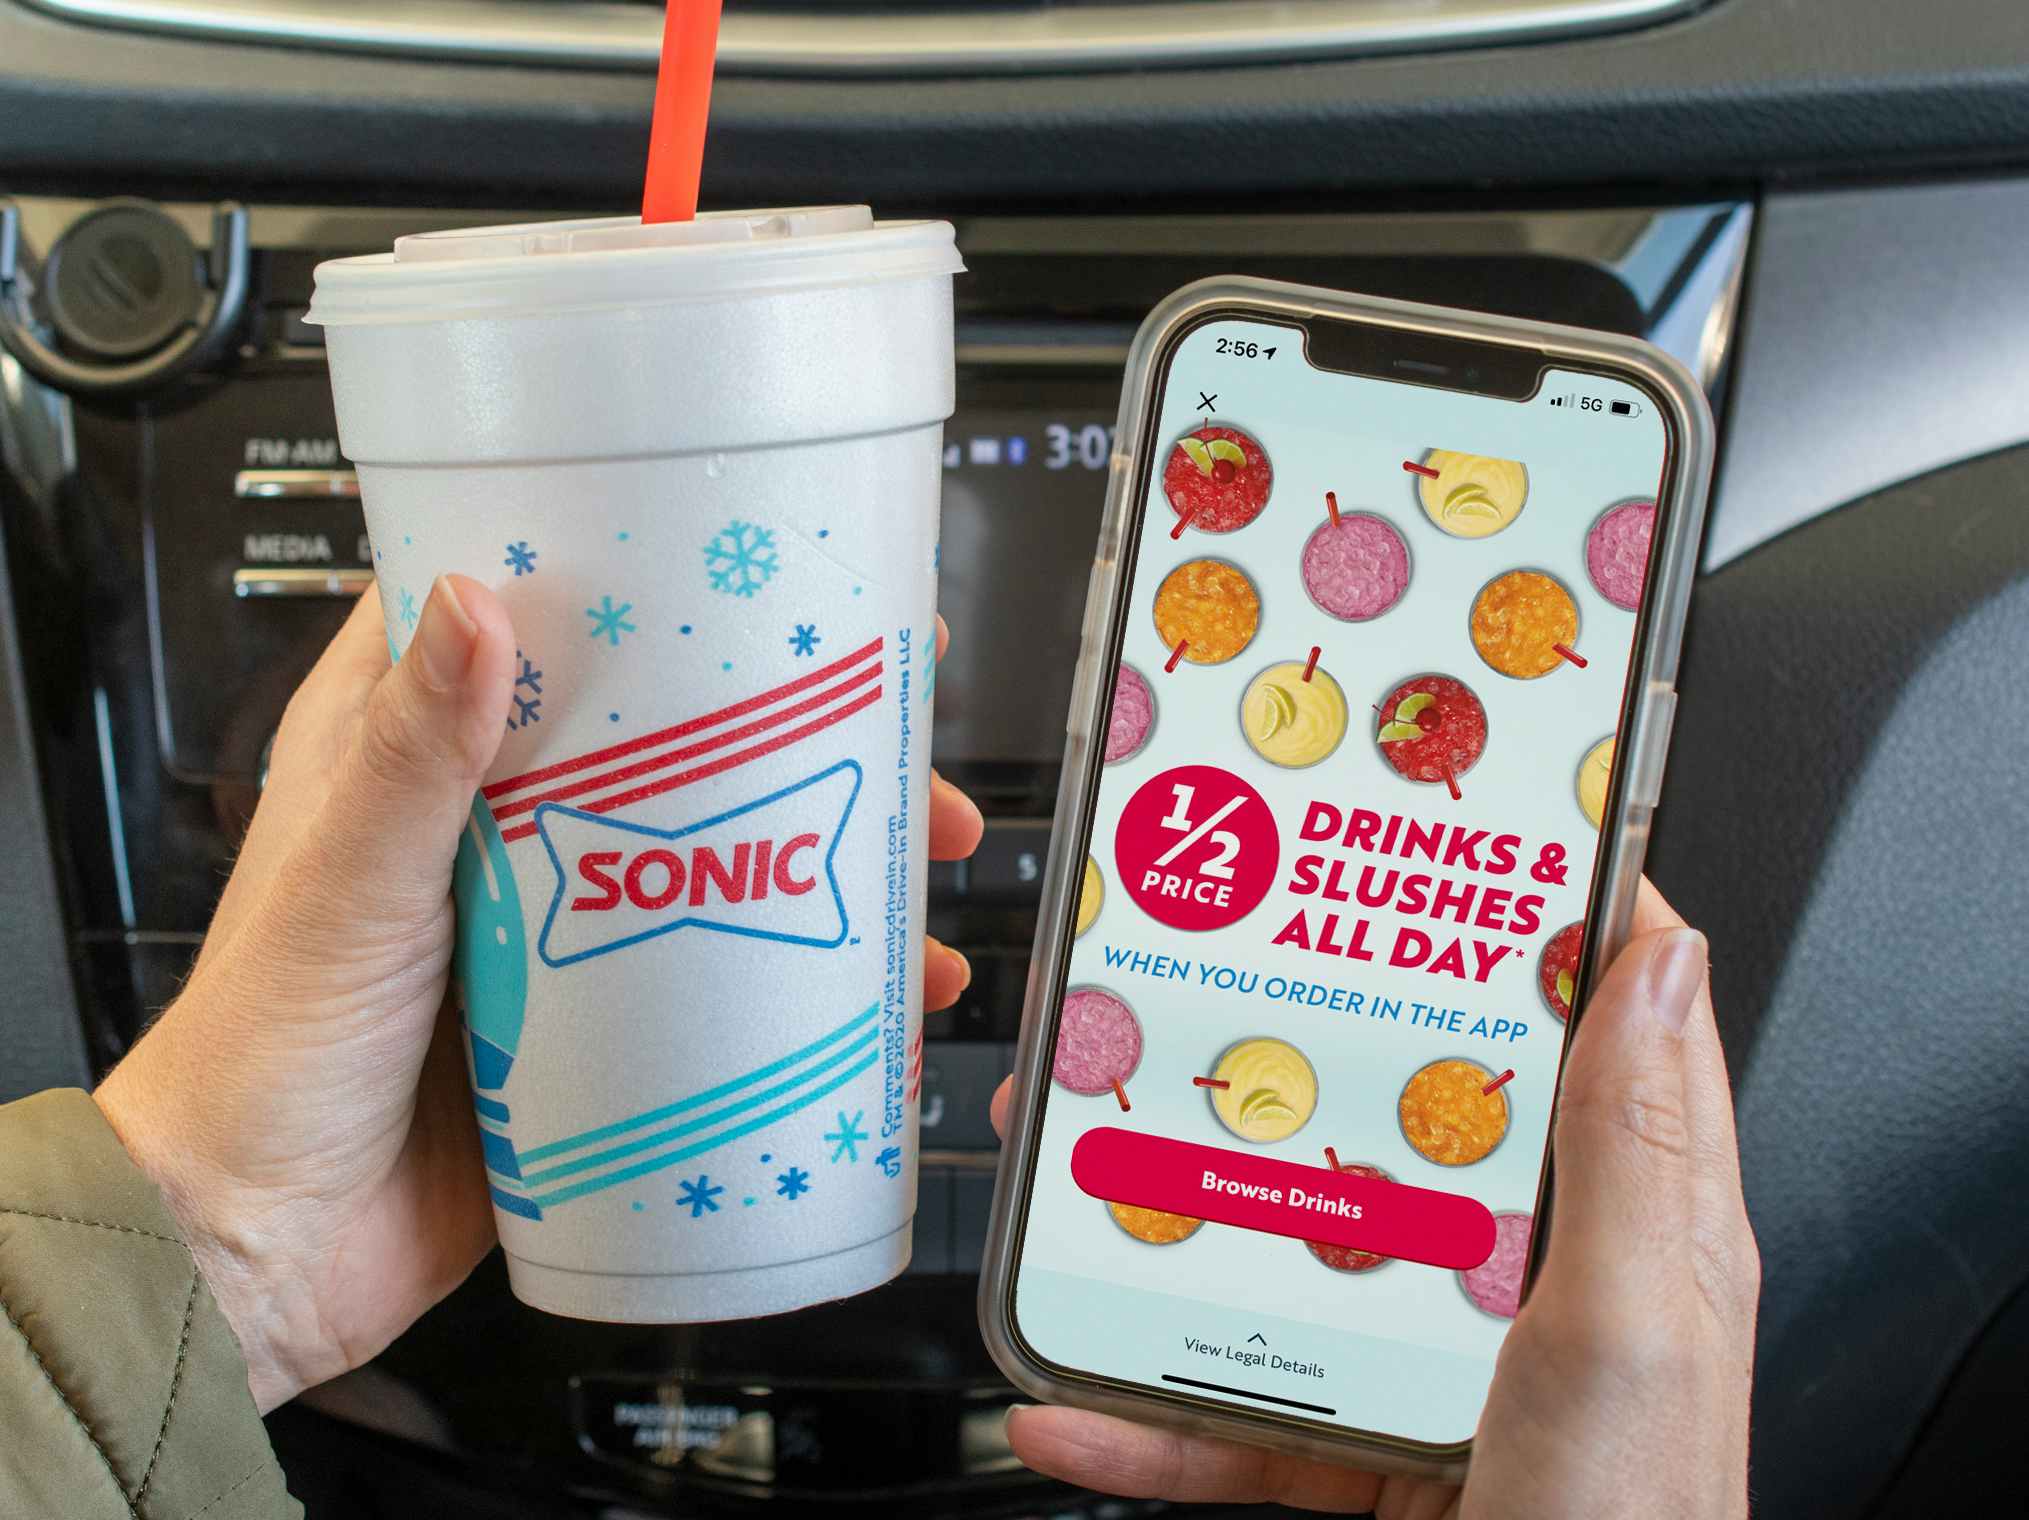 1/2 drinks and slushes all day" ad inside the Sonic app on a cell phone, next to a sonic cup.